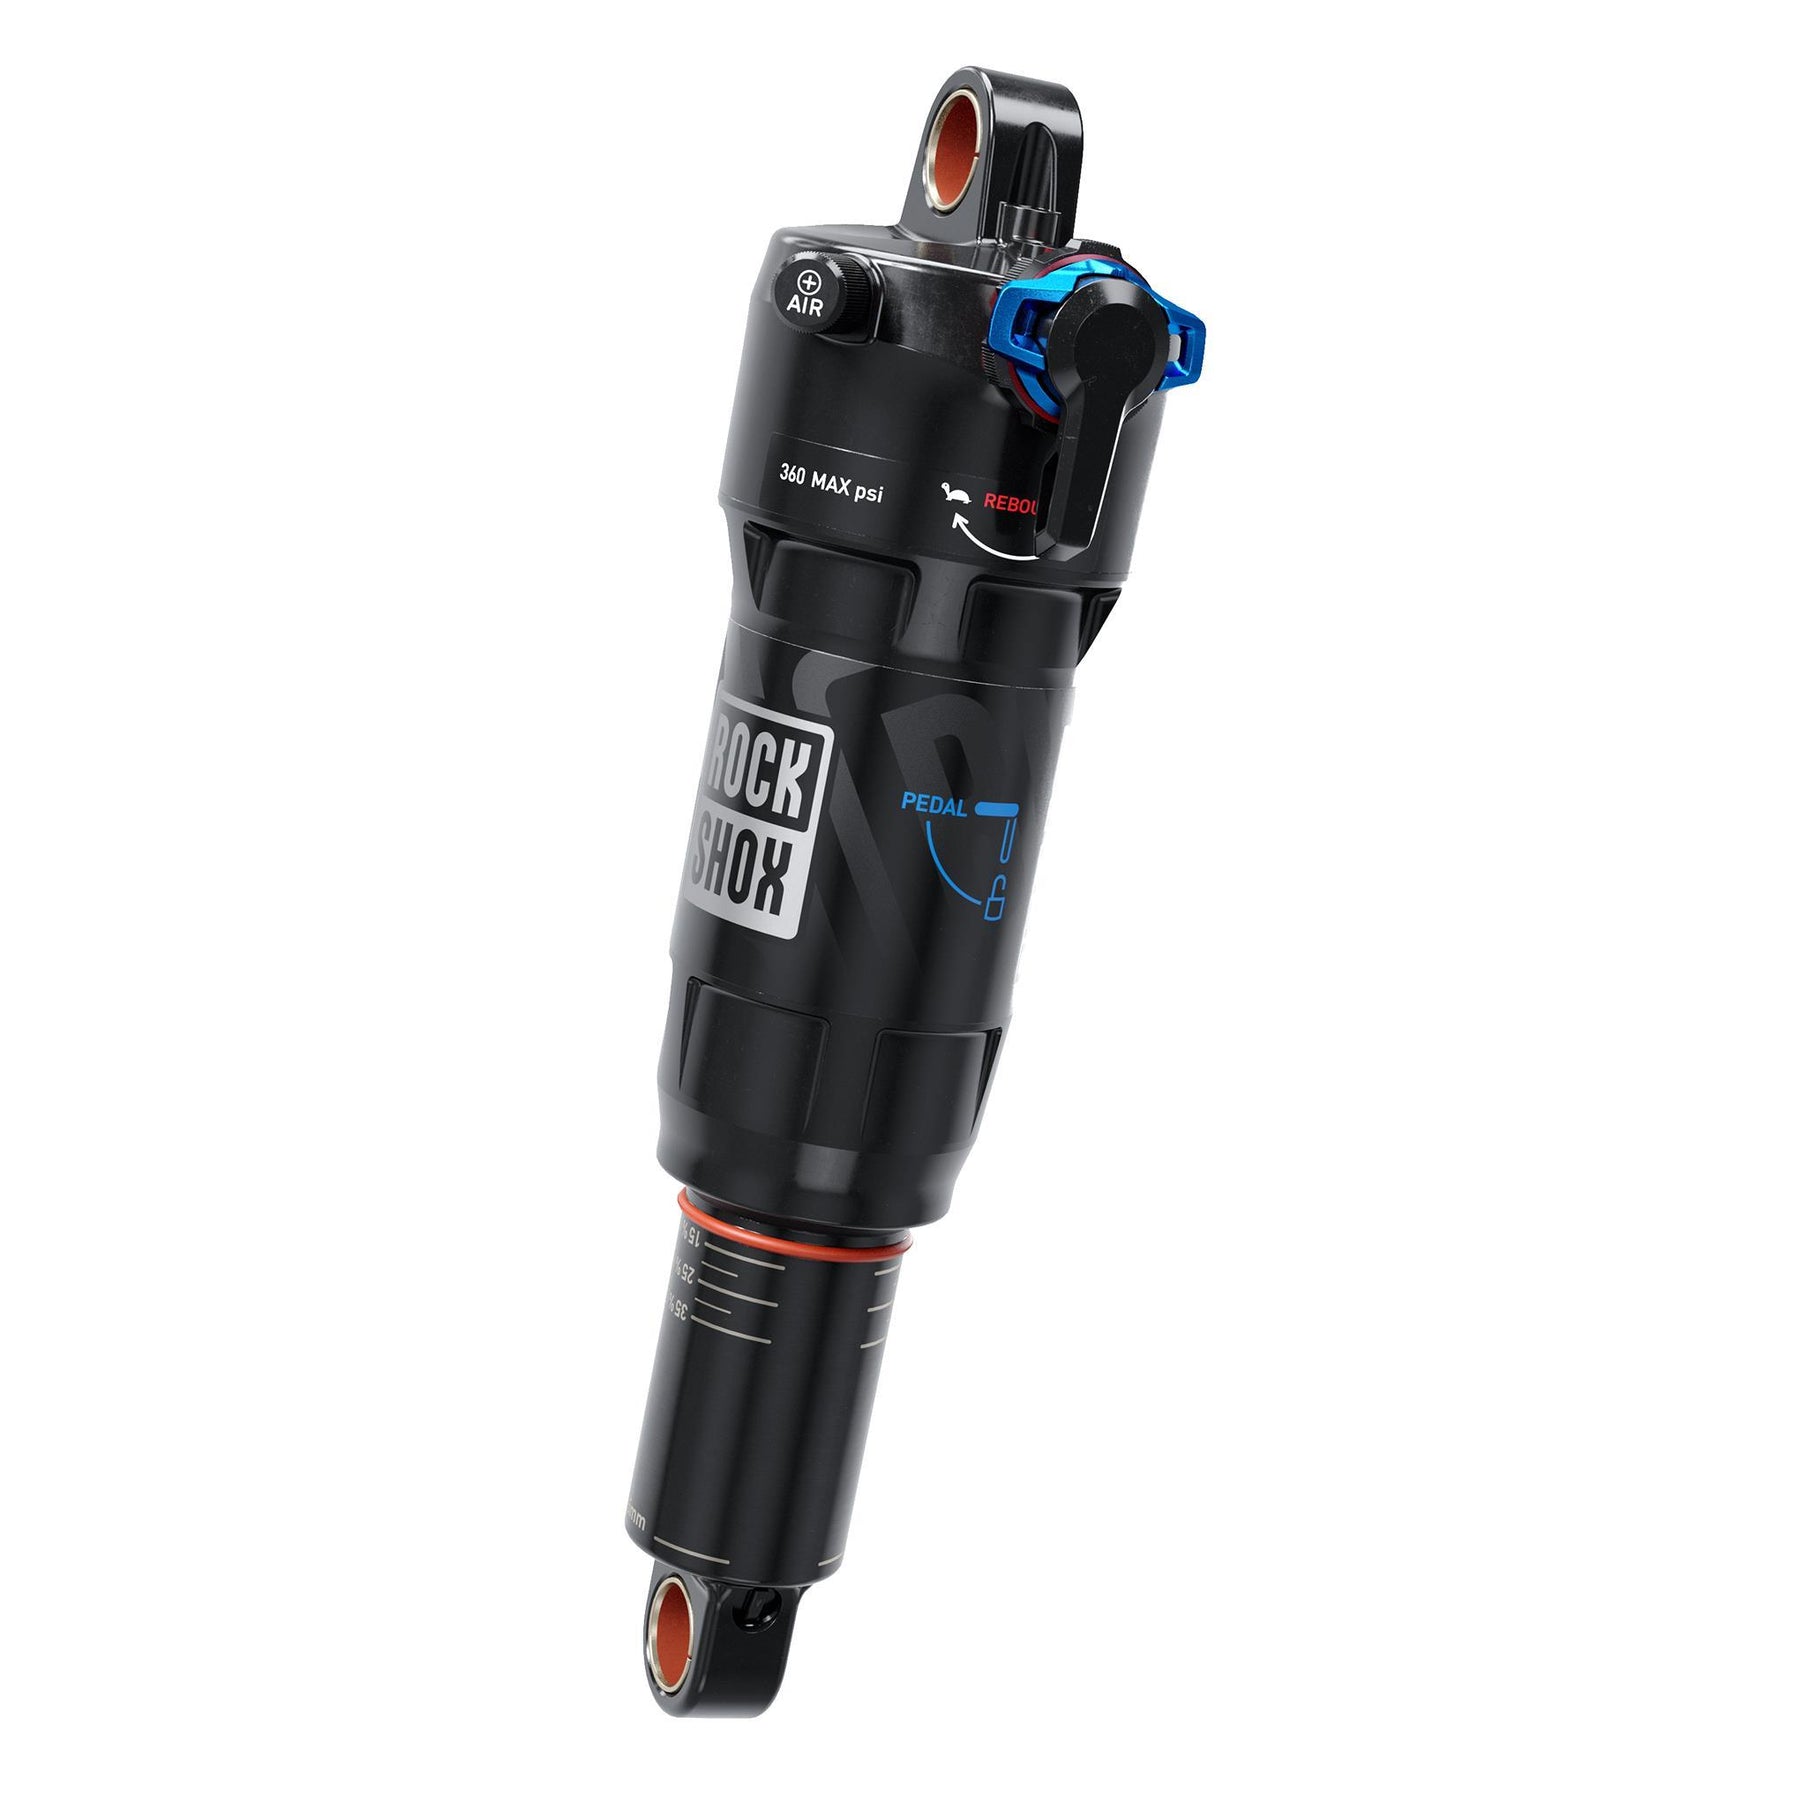 Rockshox Deluxe Ultimate Rct Rear Shock - Linear Air, 0 Neg/1 Pos Tokens, Linearreb/Lcomp, 320LB Lockout, Standard Standard C1 Norco Fluid/Optic 2019+ Black 190X45